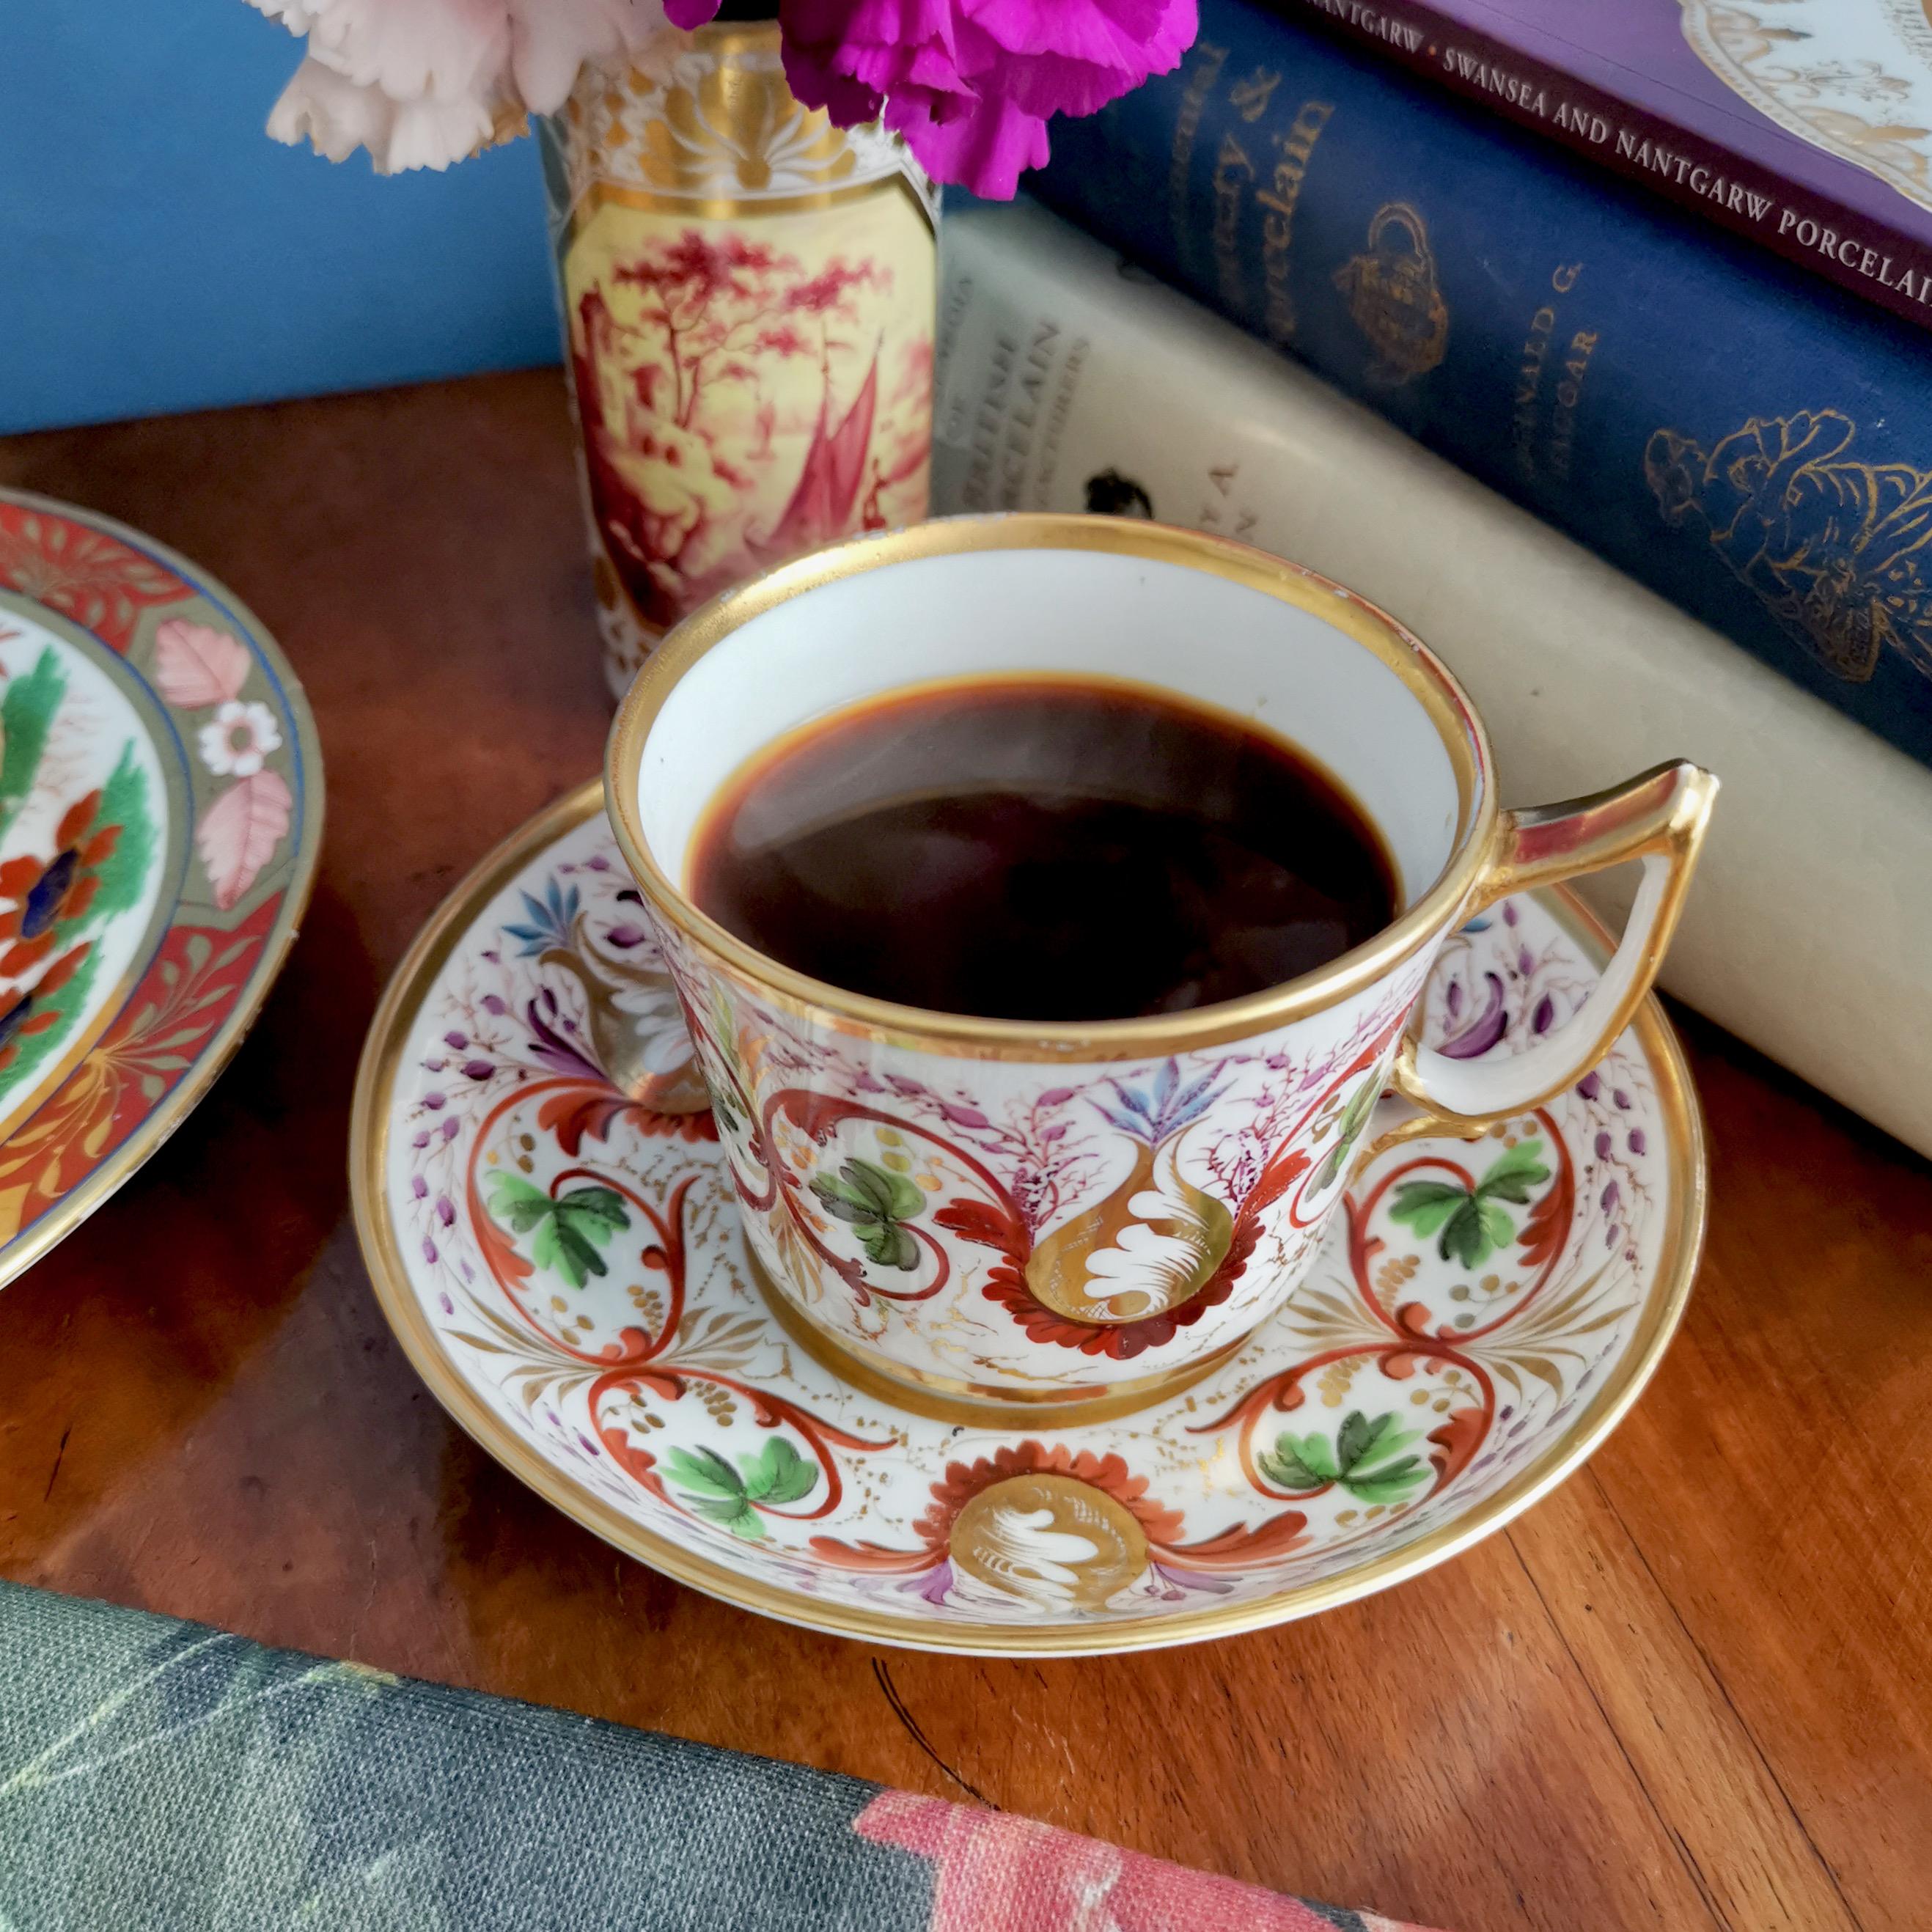 This is a very rare large coffee cup and saucer made by Derby in about 1800. The cup in in an extra large size and is therefore called a 